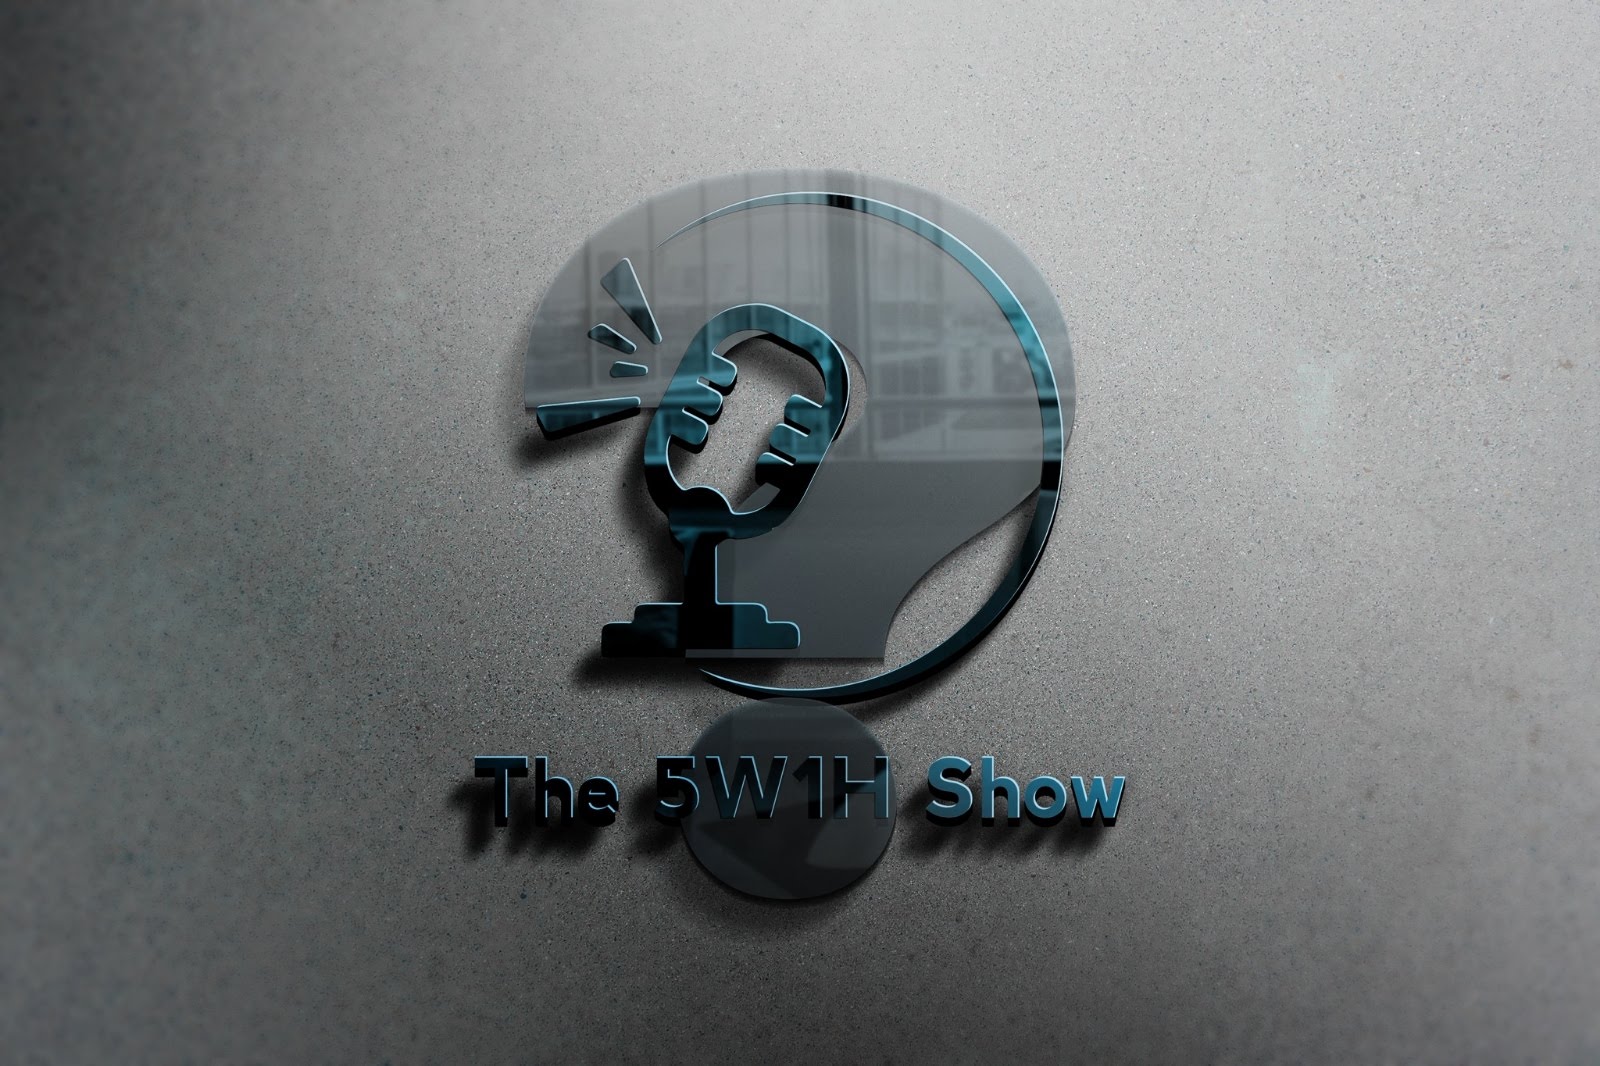 The 5W1H Show